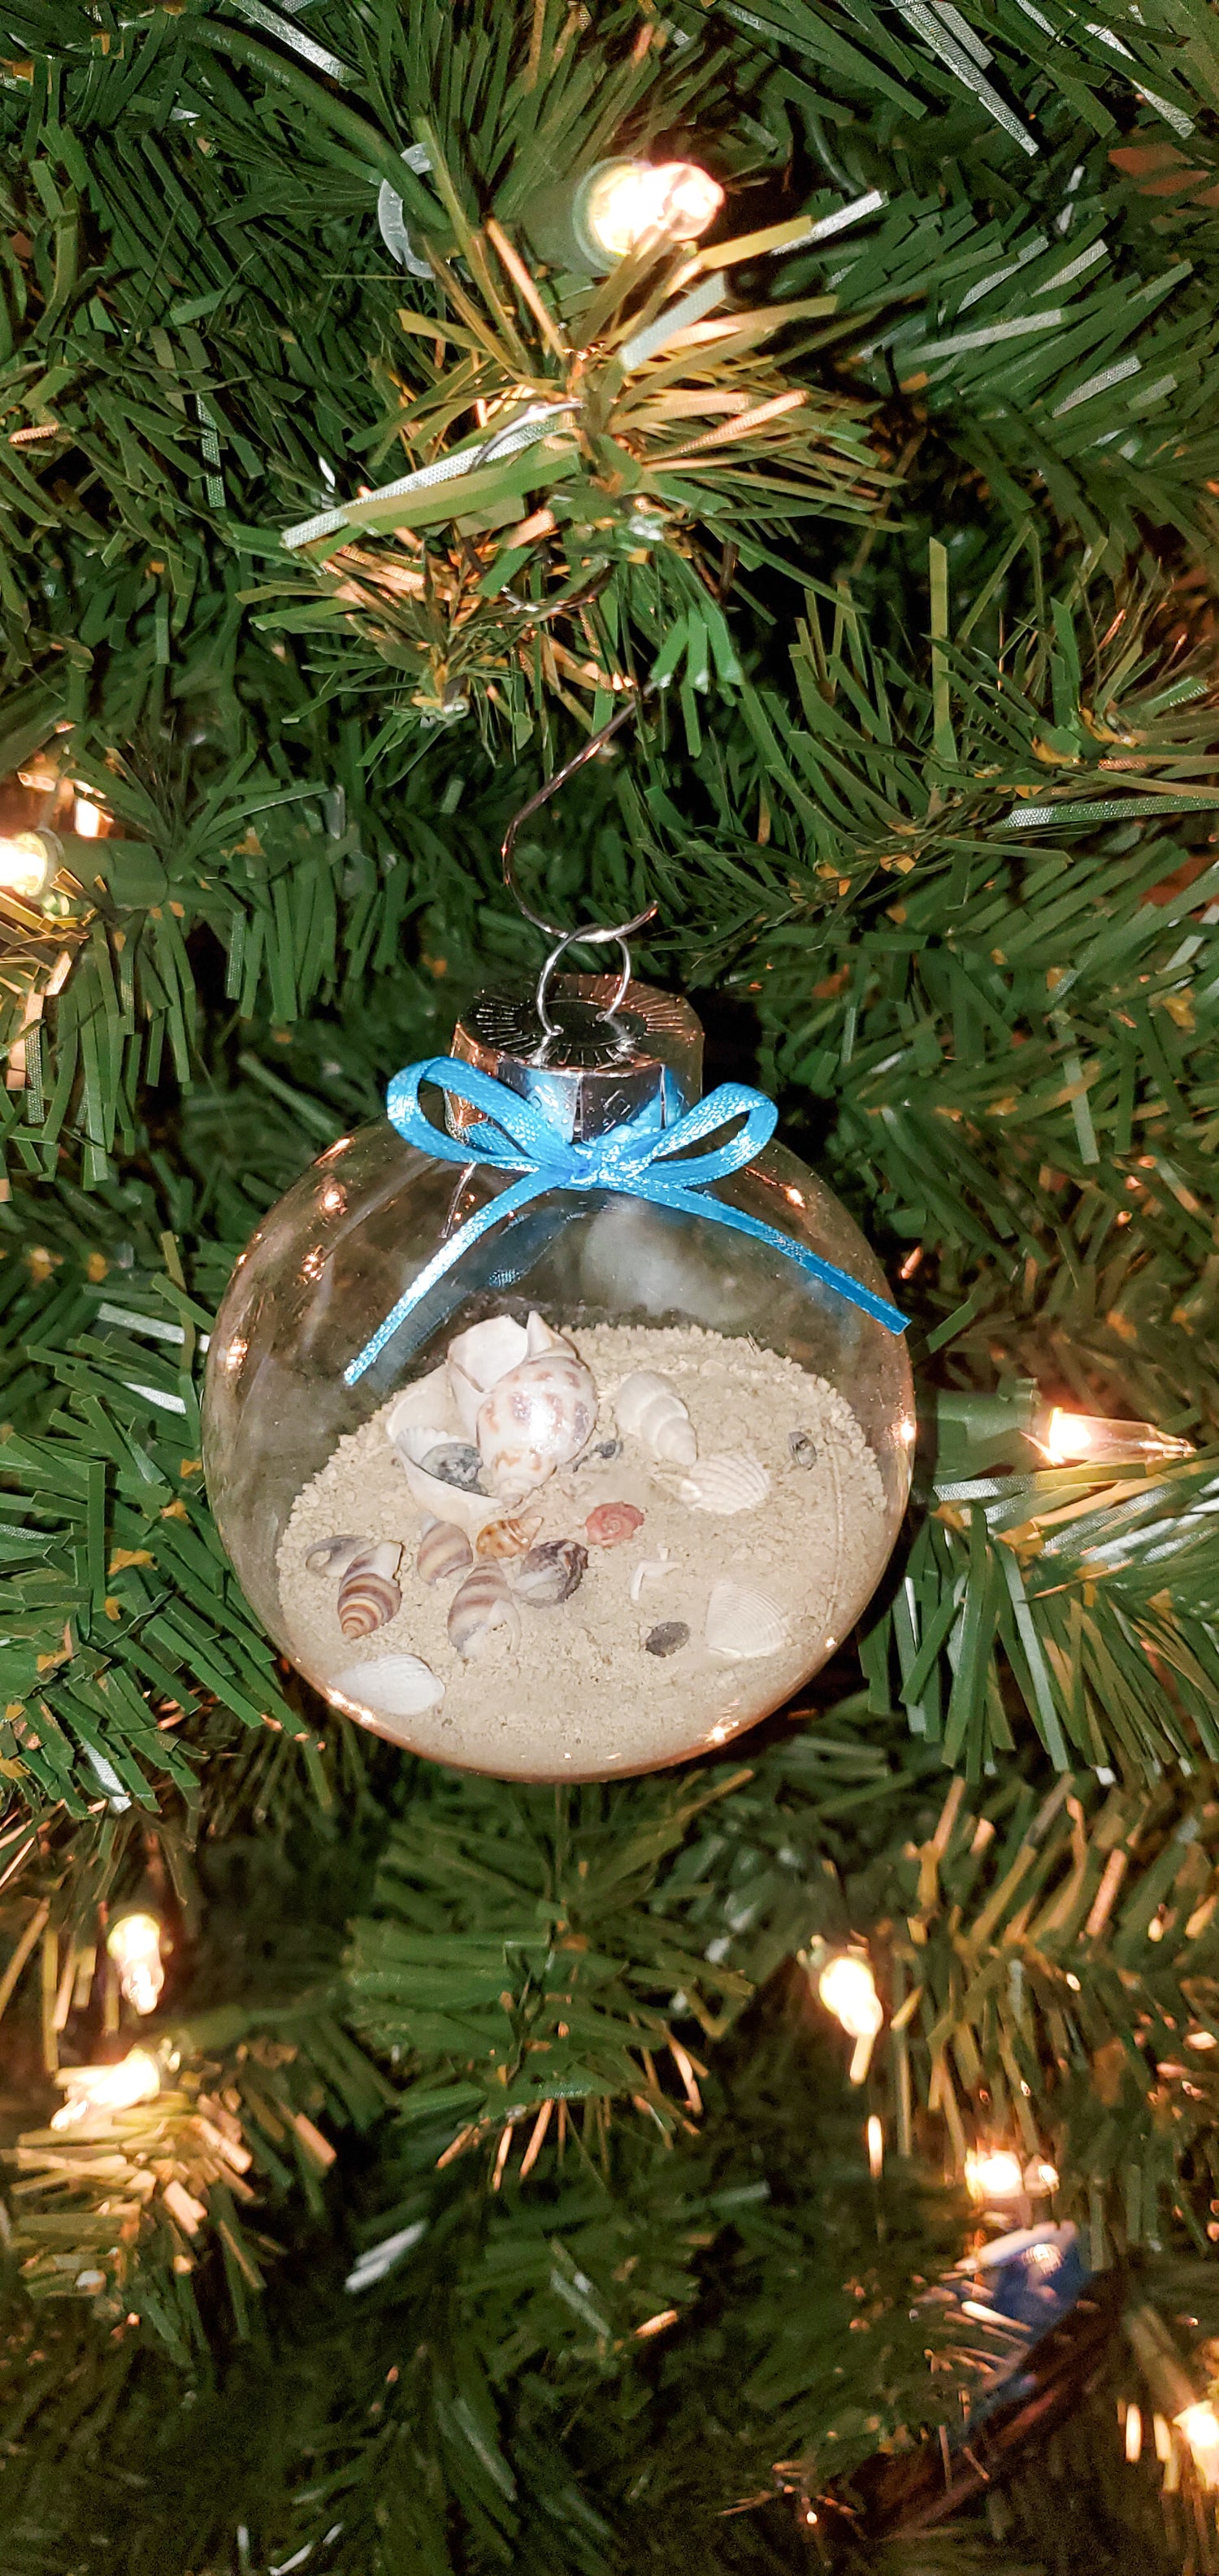 Hand Crafted Ornaments